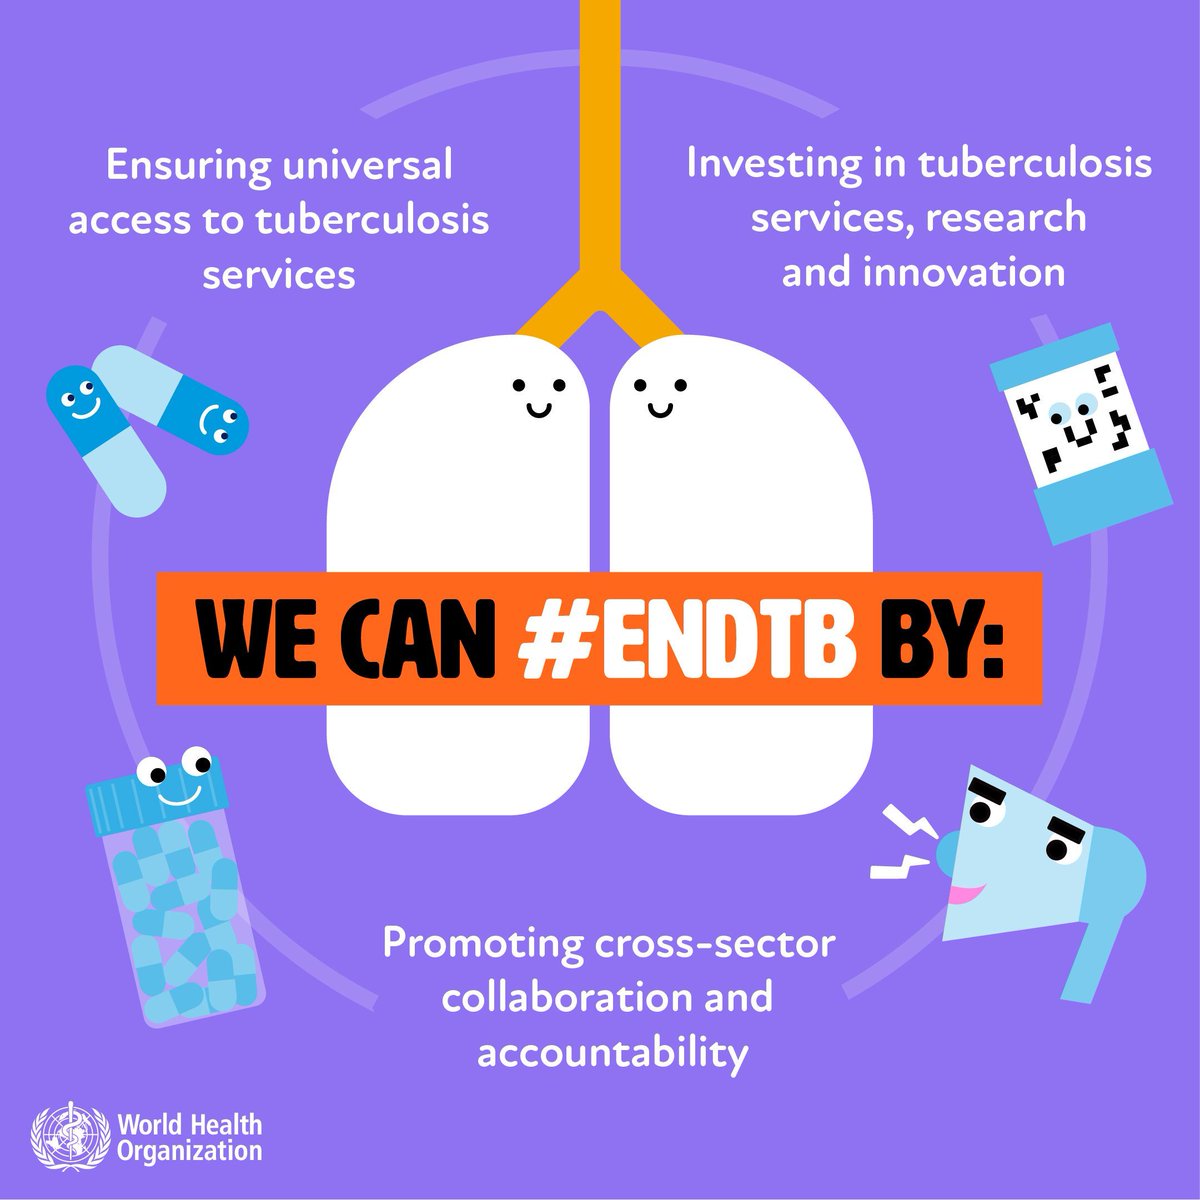 It's #WorldTBDay! 'Yes! We can end TB!' by ➡️ ensuring universal access to TB services ➡️ investing in TB services, research and innovation ➡️ promoting cross-sector collaboration and accountability